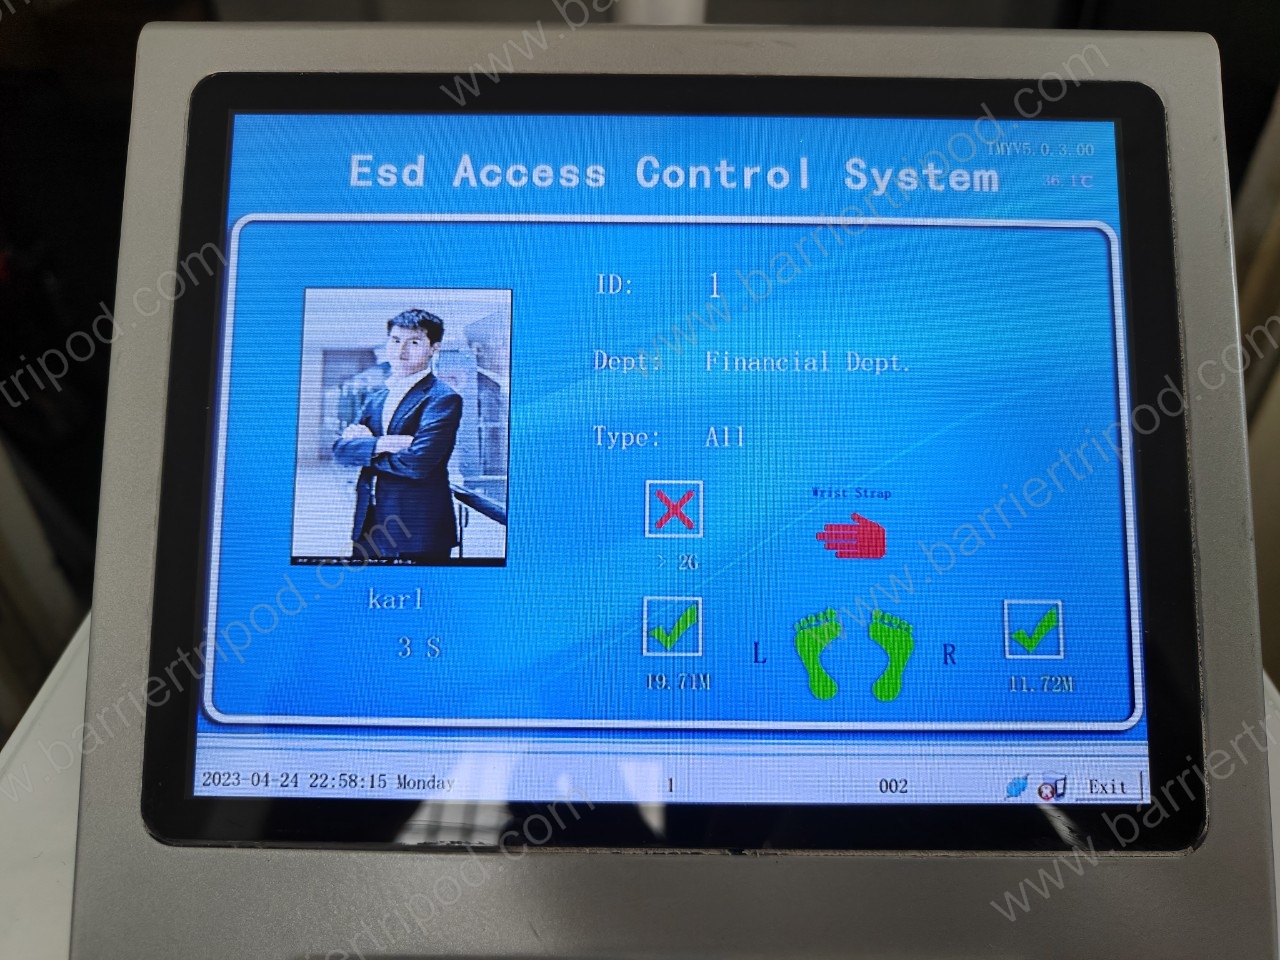 Esd access control system